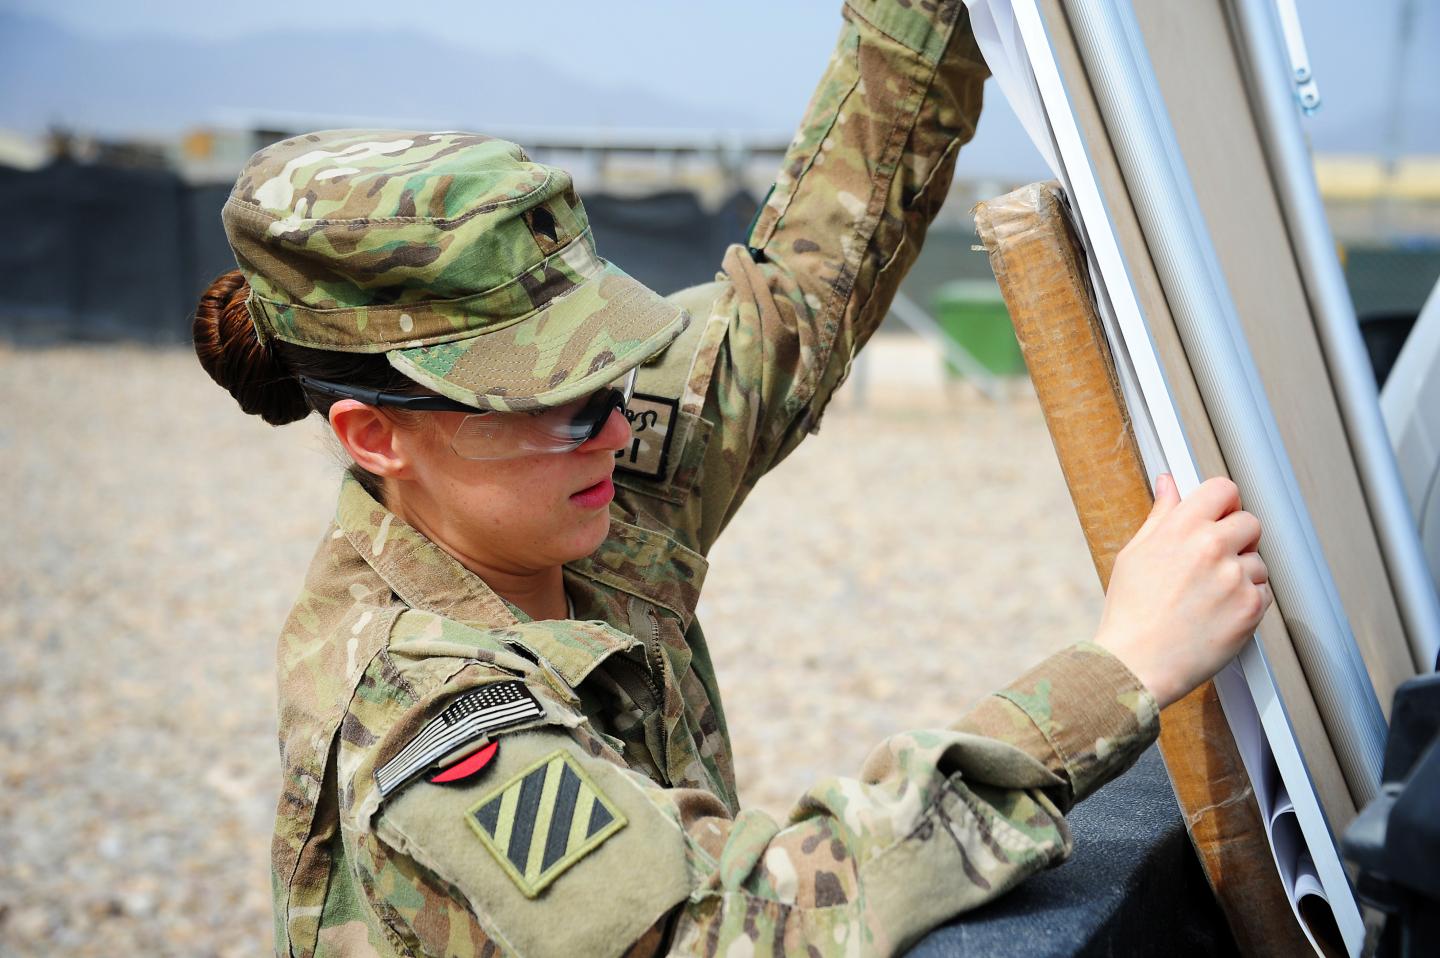 Study Yields Insight on Post-Assault Care for Servicewomen